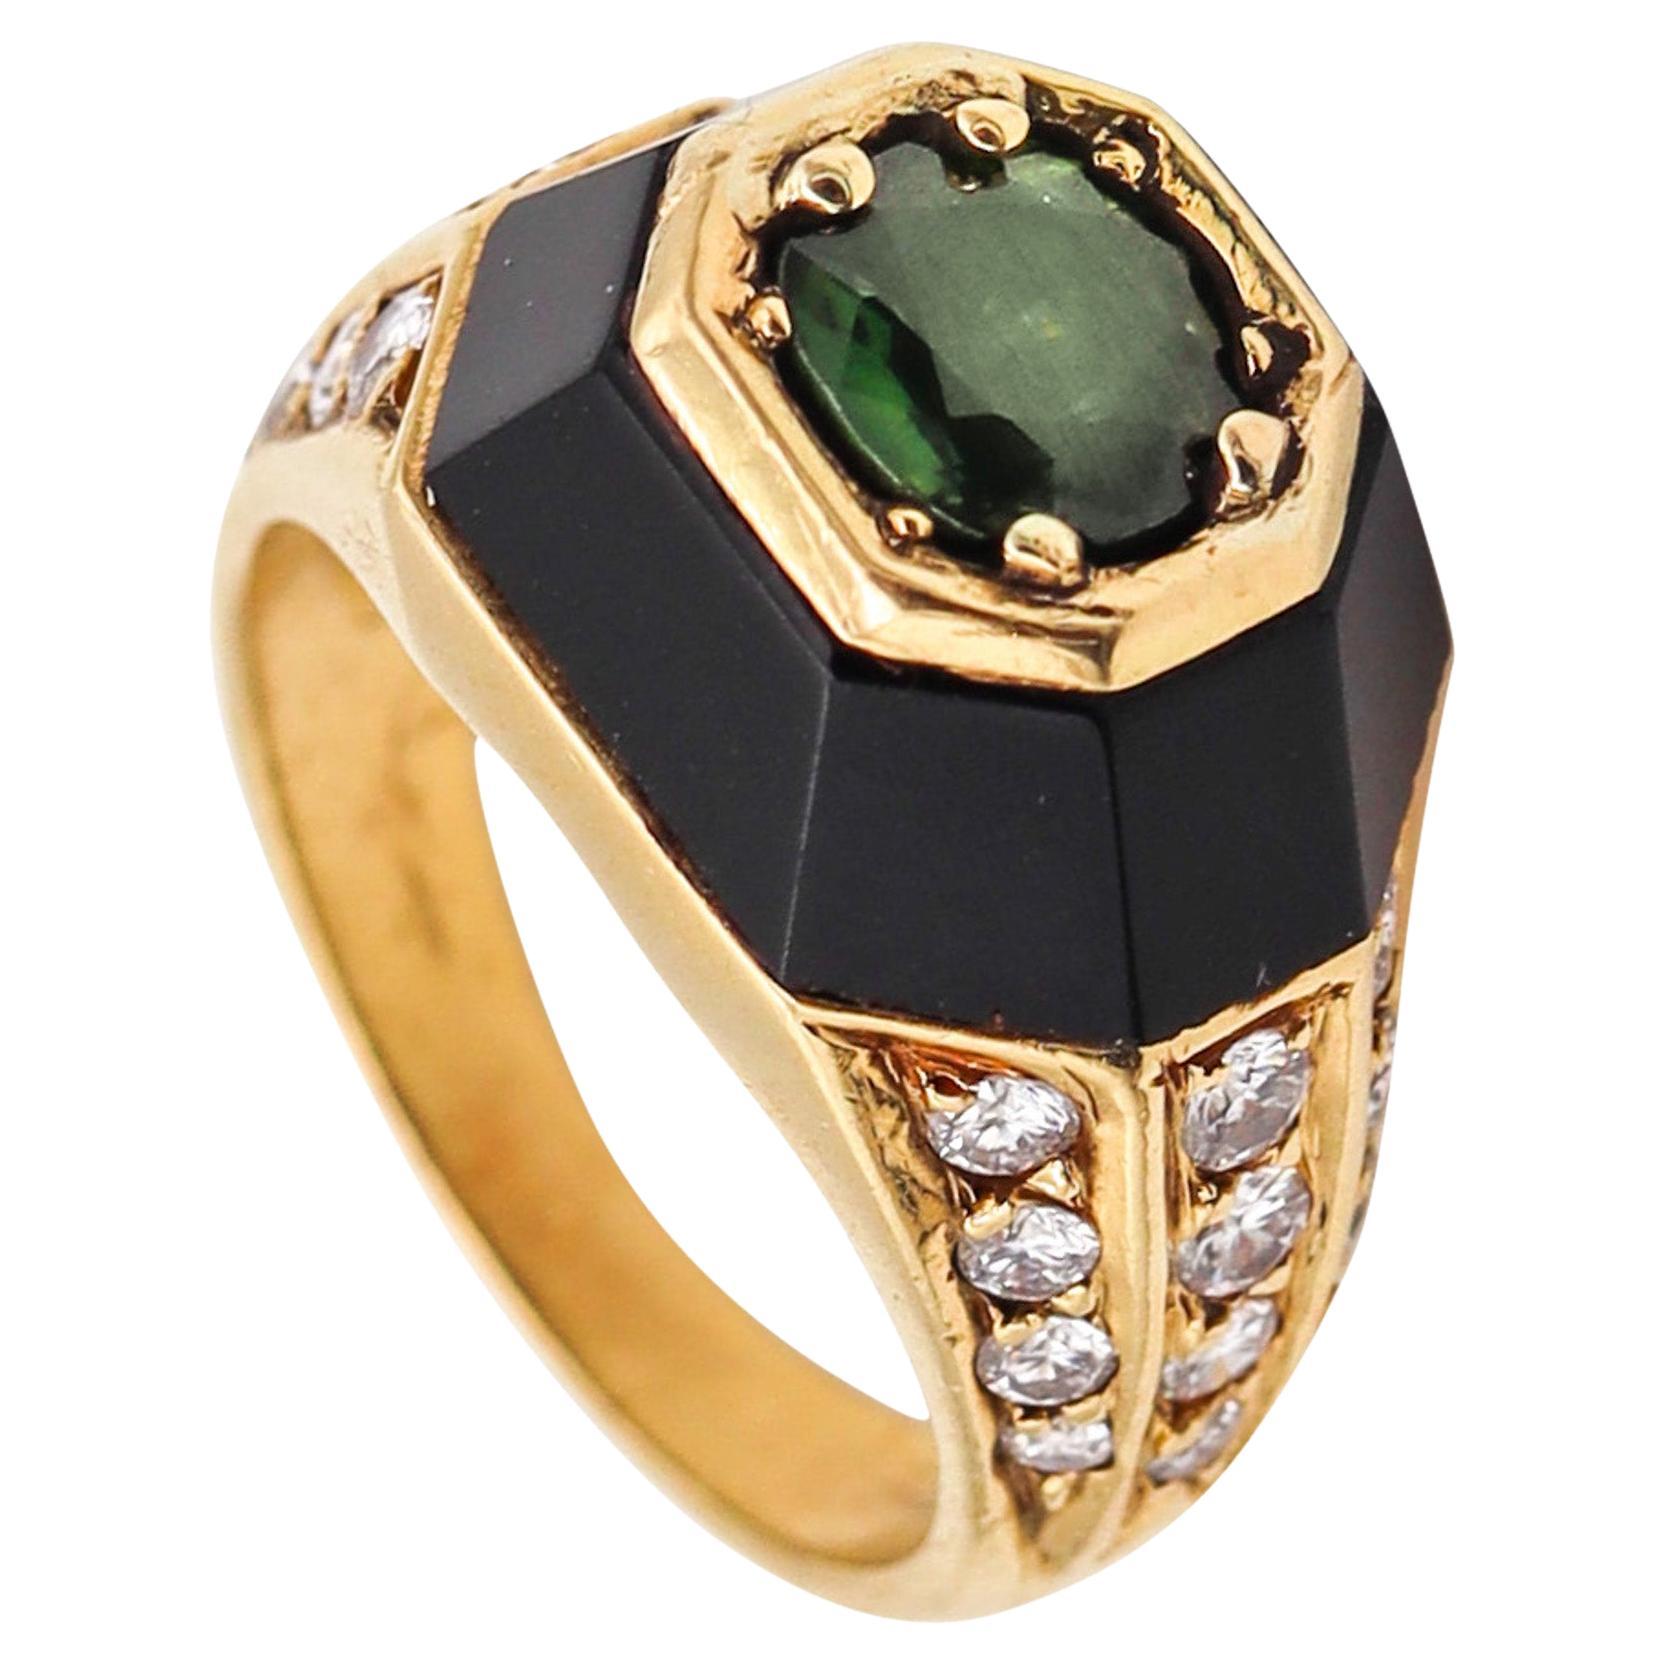 Jean Thierry Bond 1970 Paris Ring in 18kt Gold with 1.92 Ctw Diamonds Tourmaline